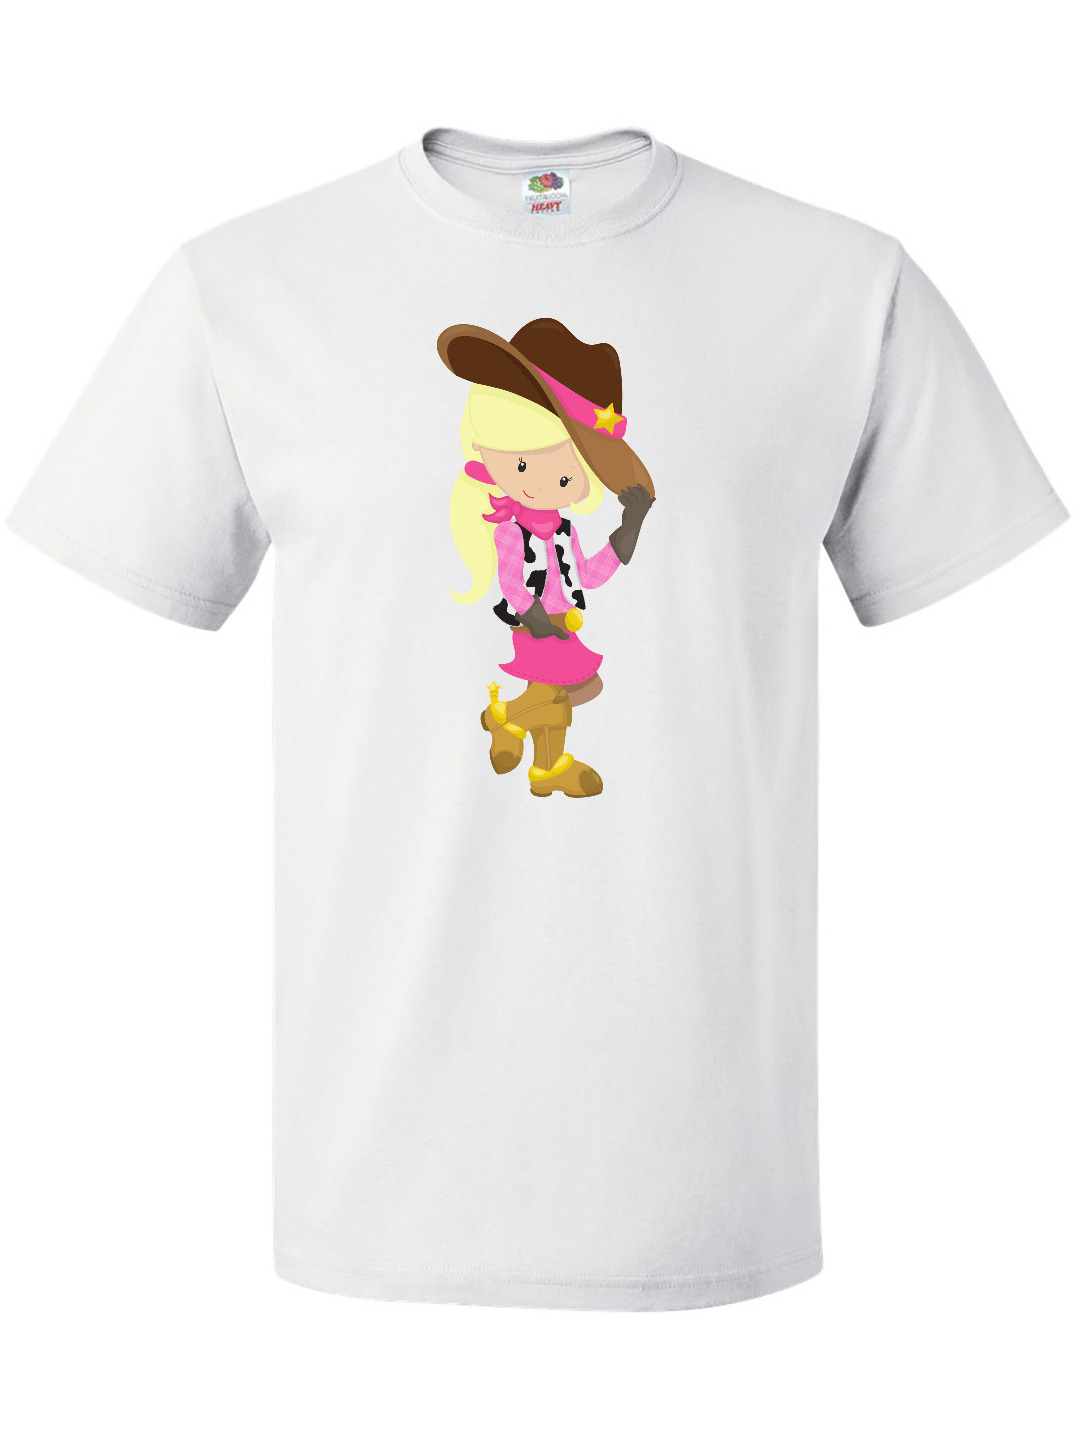 Inktastic Cowboy Girl, Girl With Cowboy Hat, Blonde Hair T-Shirt - image 1 of 4